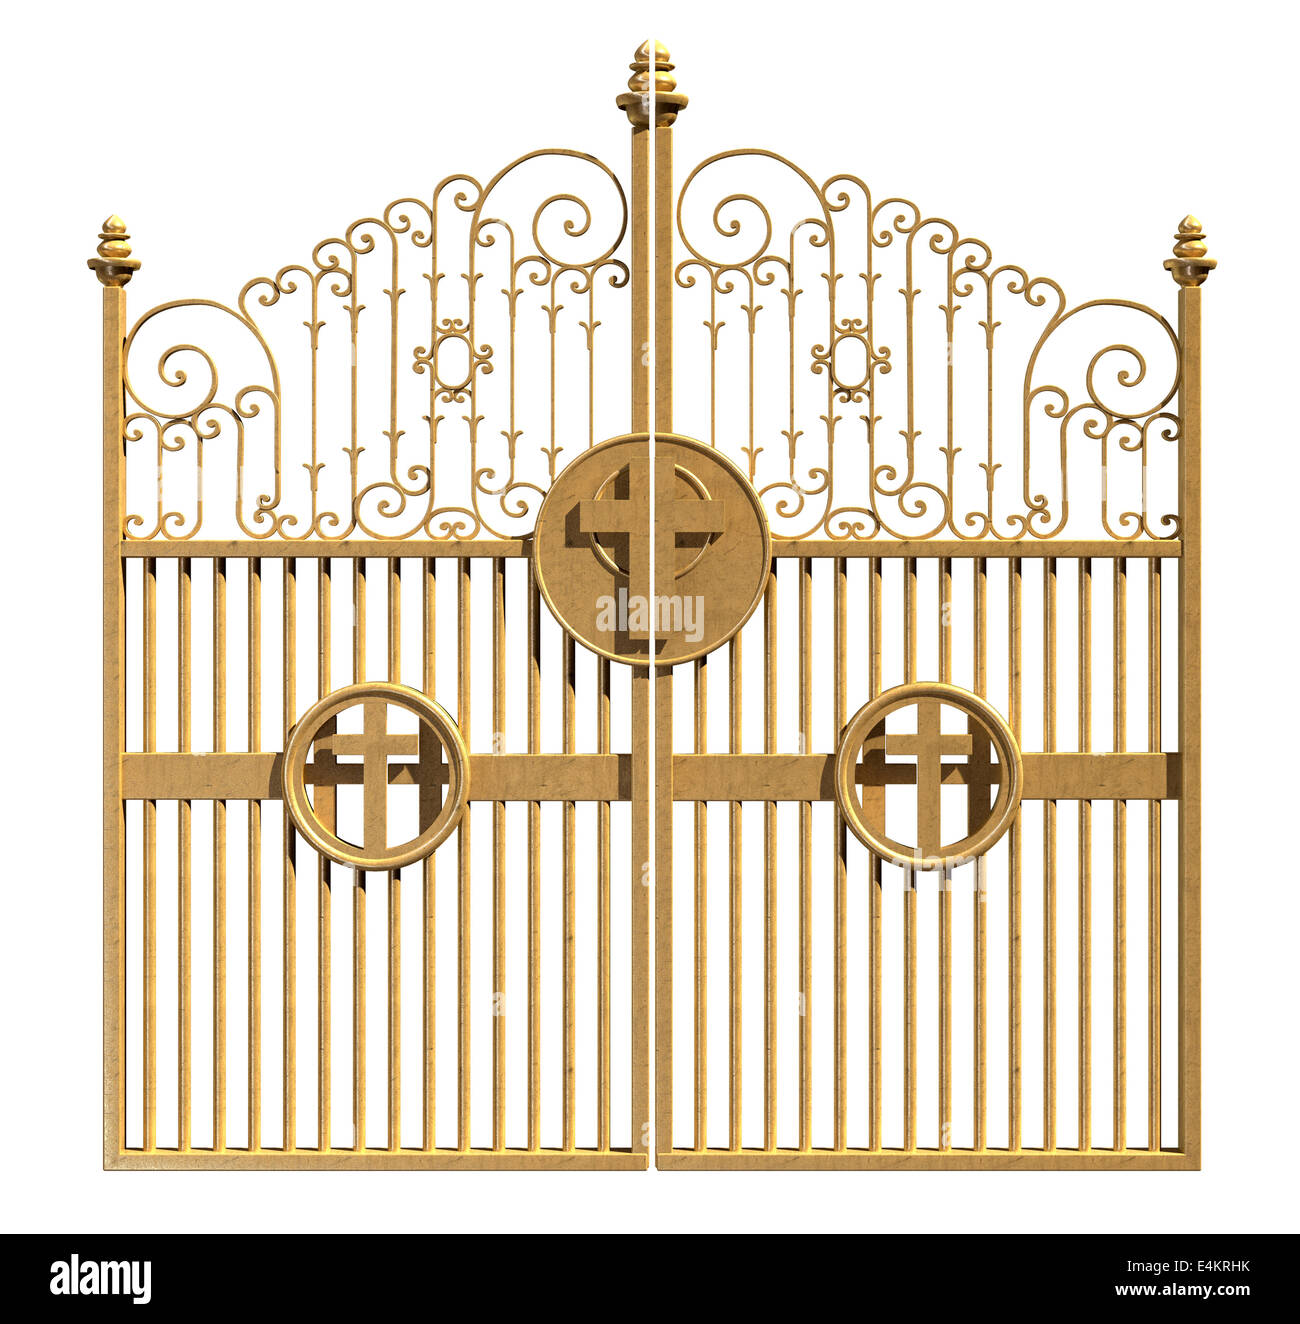 A concept image of the golden gates to heaven shut on an isolated white background Stock Photo